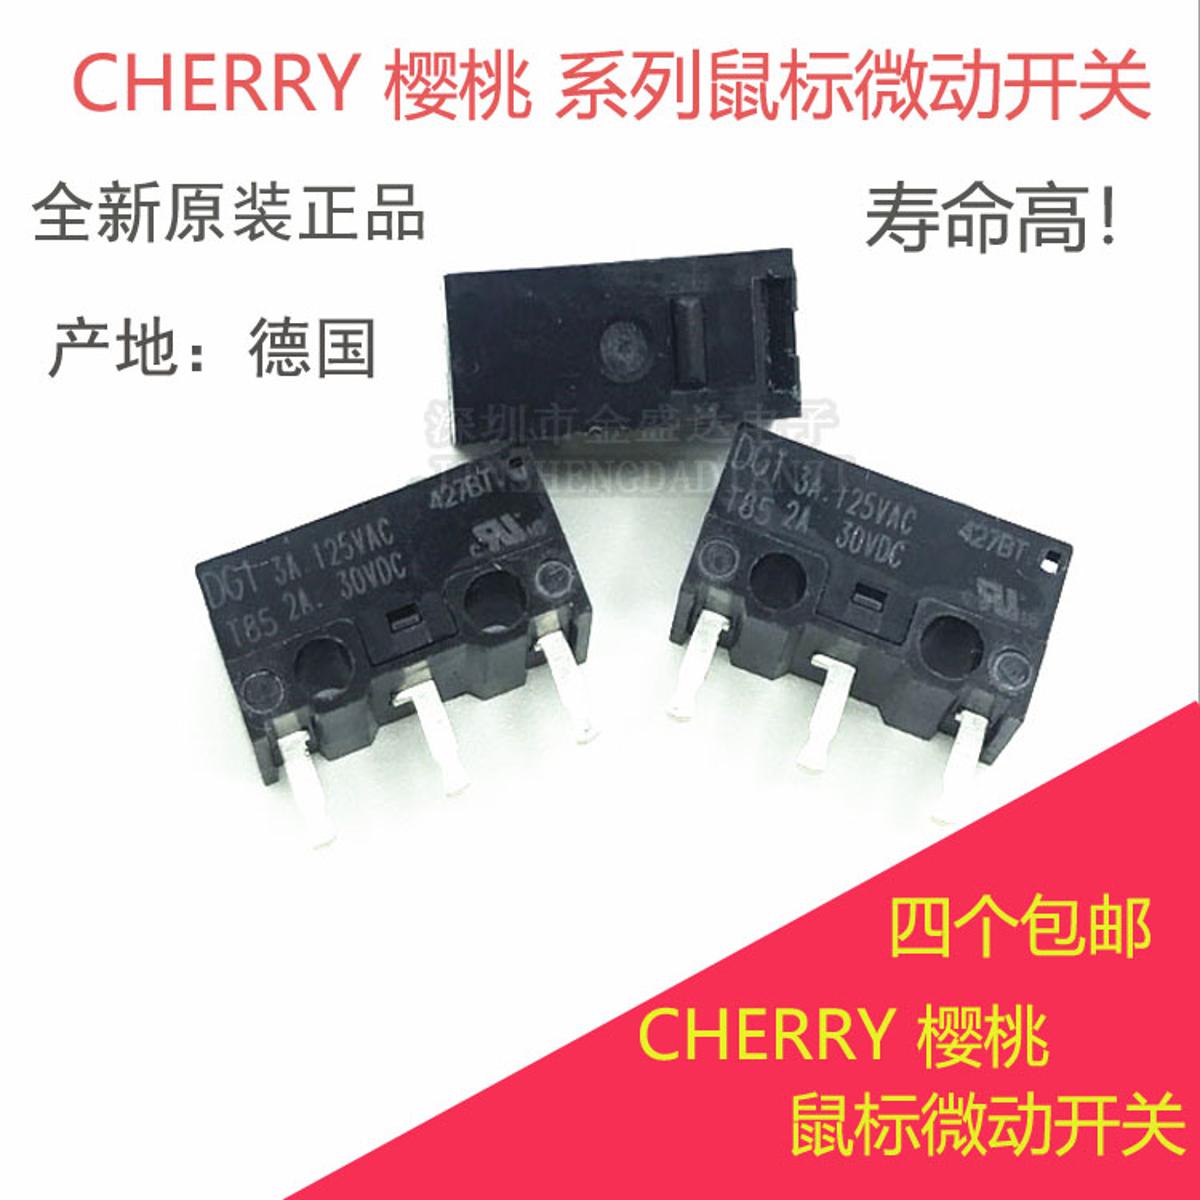 Germany Cherry DG2 T85 MICRO SWITCH PIN PLUNGER For Apple Razer